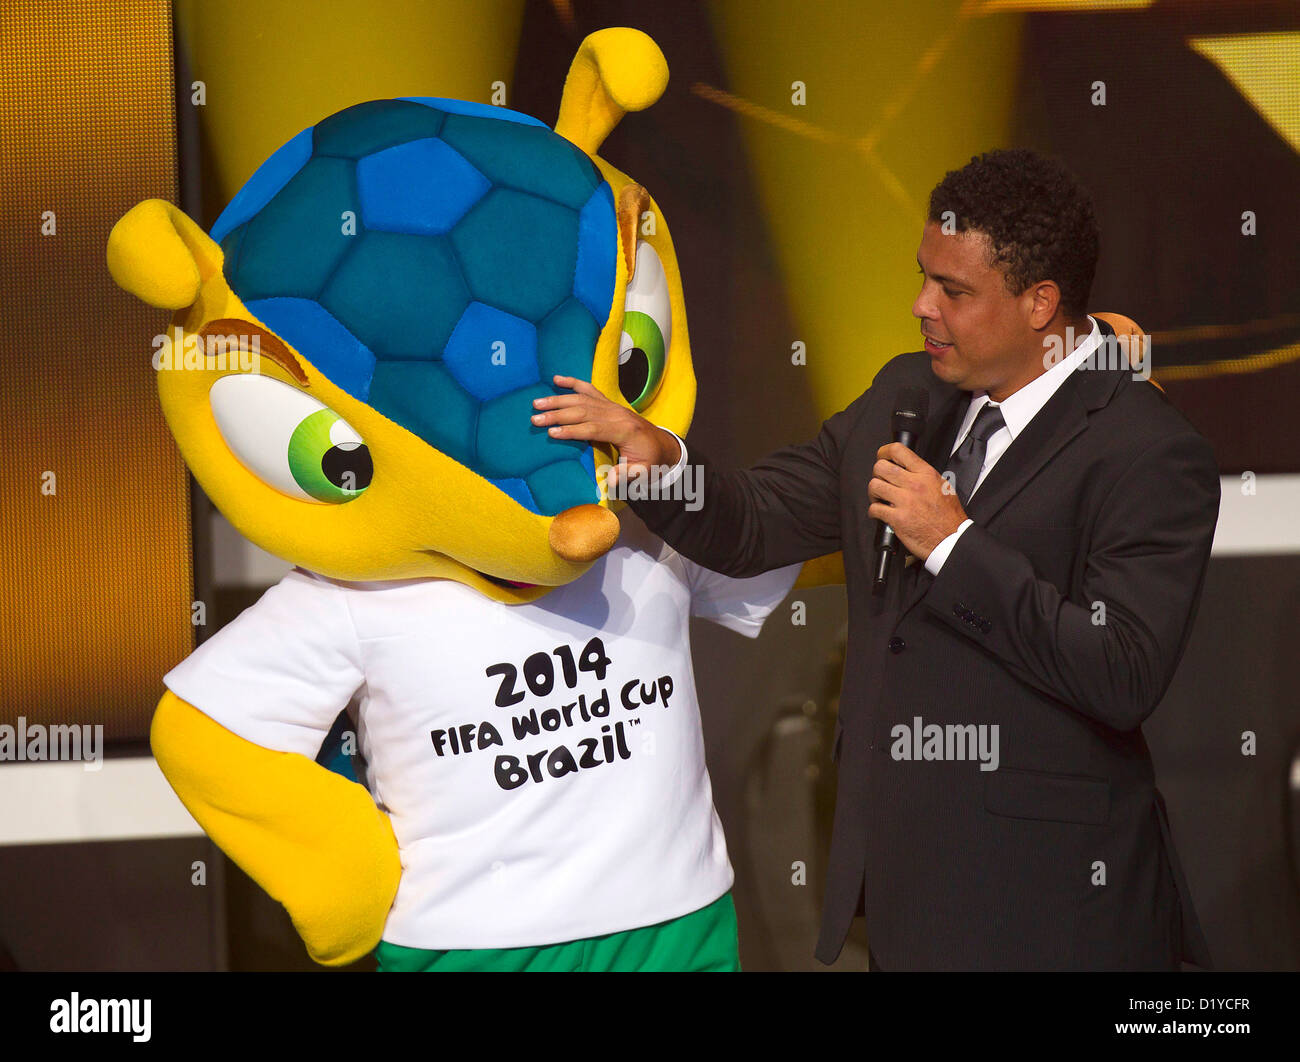 Ronaldo, right, poses with Fuleco, left, mascot of the 2014 Soccer World Cup, during FIFA Ballon d'Or Gala 2012 at the Kongresshaus on January 7, 2013 in Zurich, Switzerland. Foto: S.Lau Stock Photo